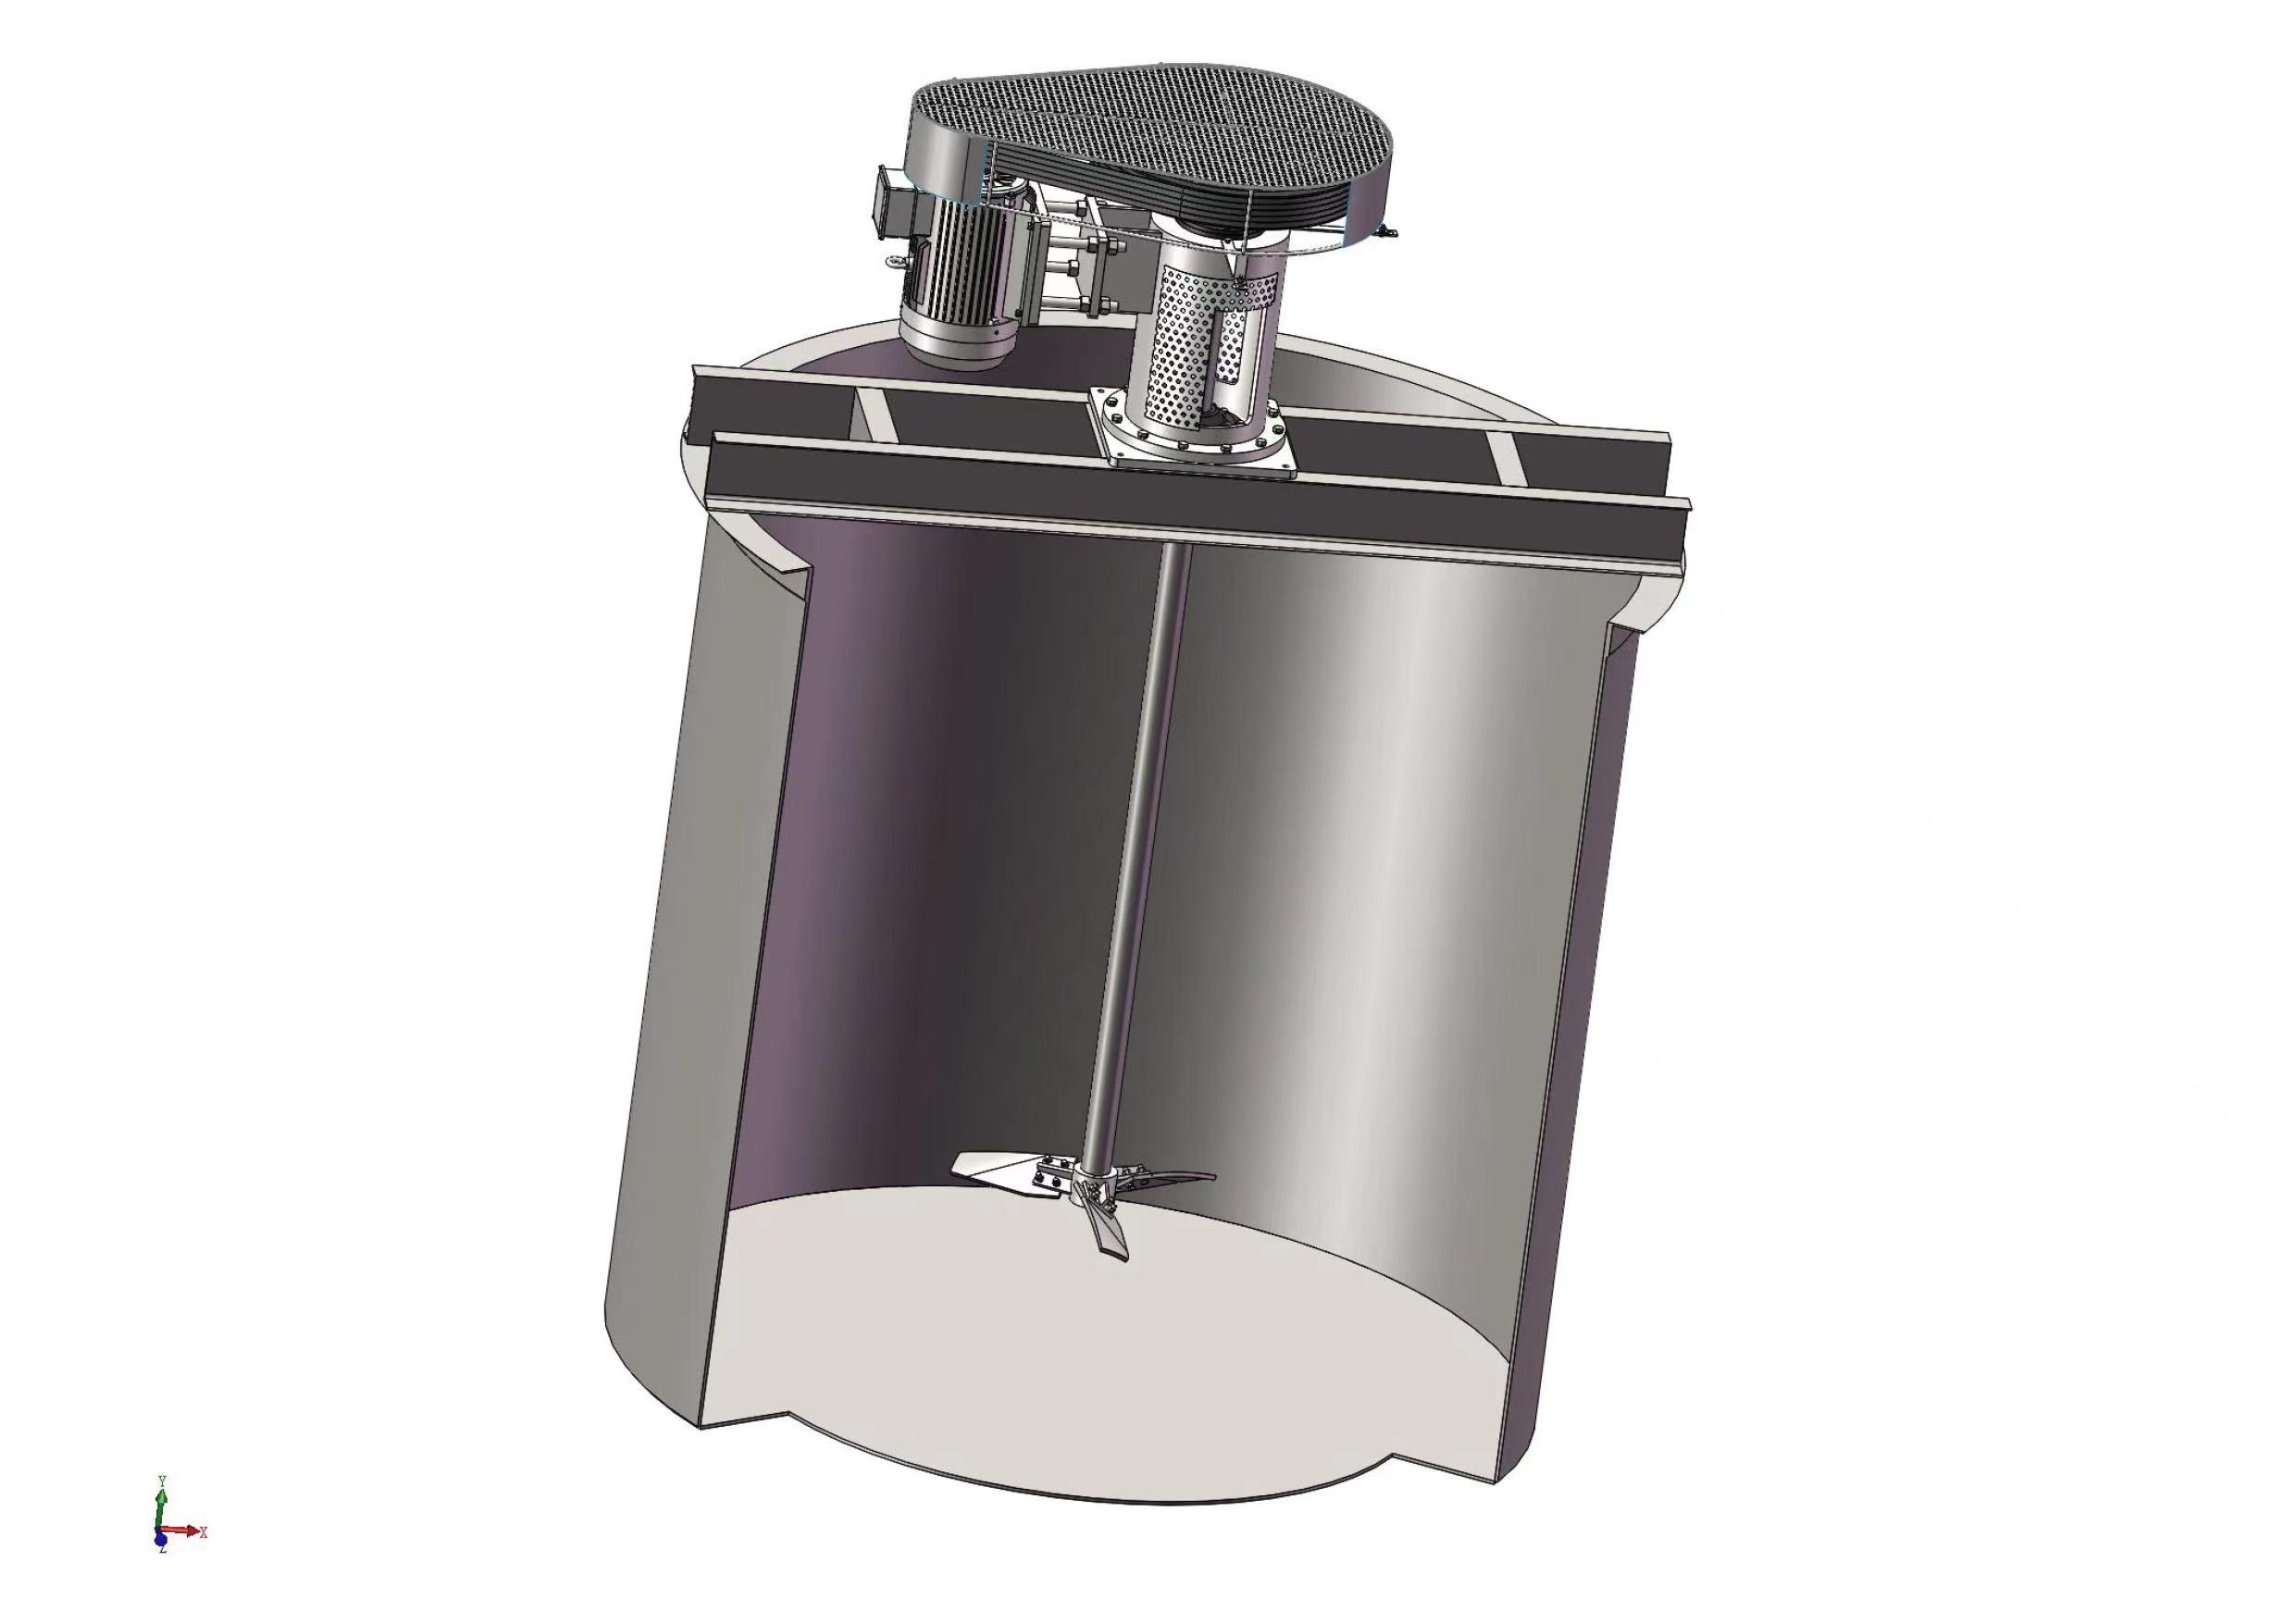 Stainless Steel Mixers And Agitators For Process Requirements Agitators And Applications For Food Chemical Biopharma Industries.